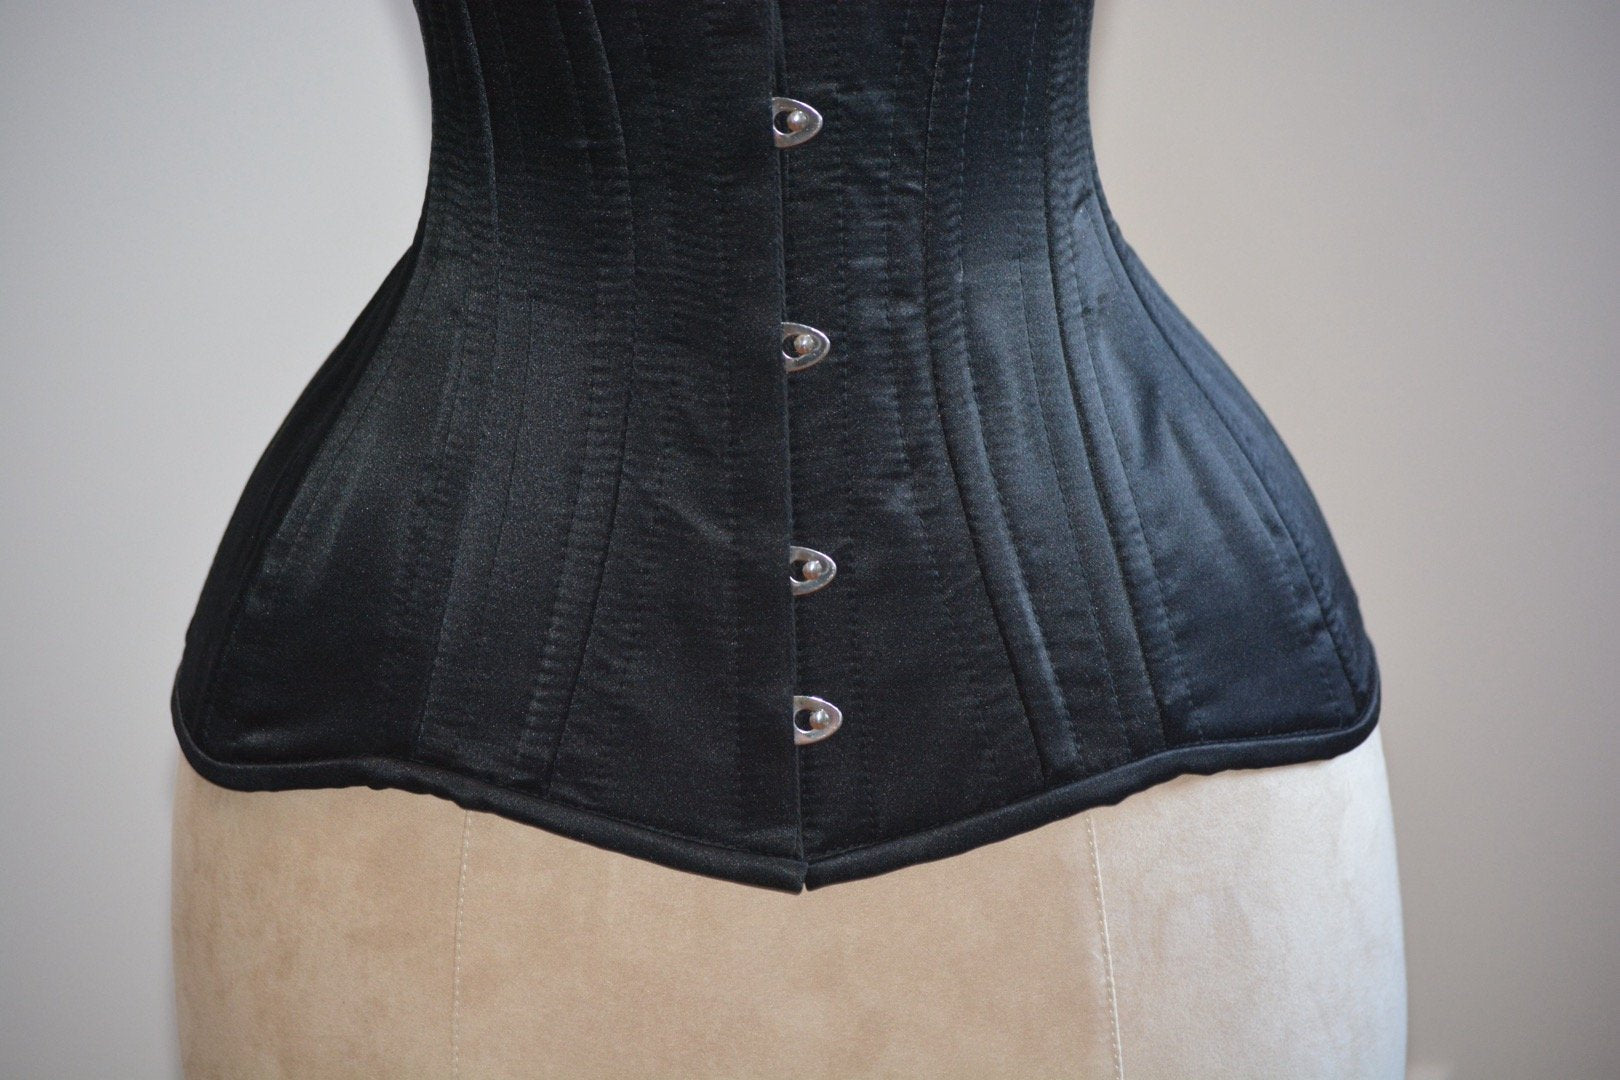 Lambskin Waist Steel-boned Authentic Corset, Different Colors. Leather  Corset for Tight Lacing and Waist Training, Steampunk, Gothic 